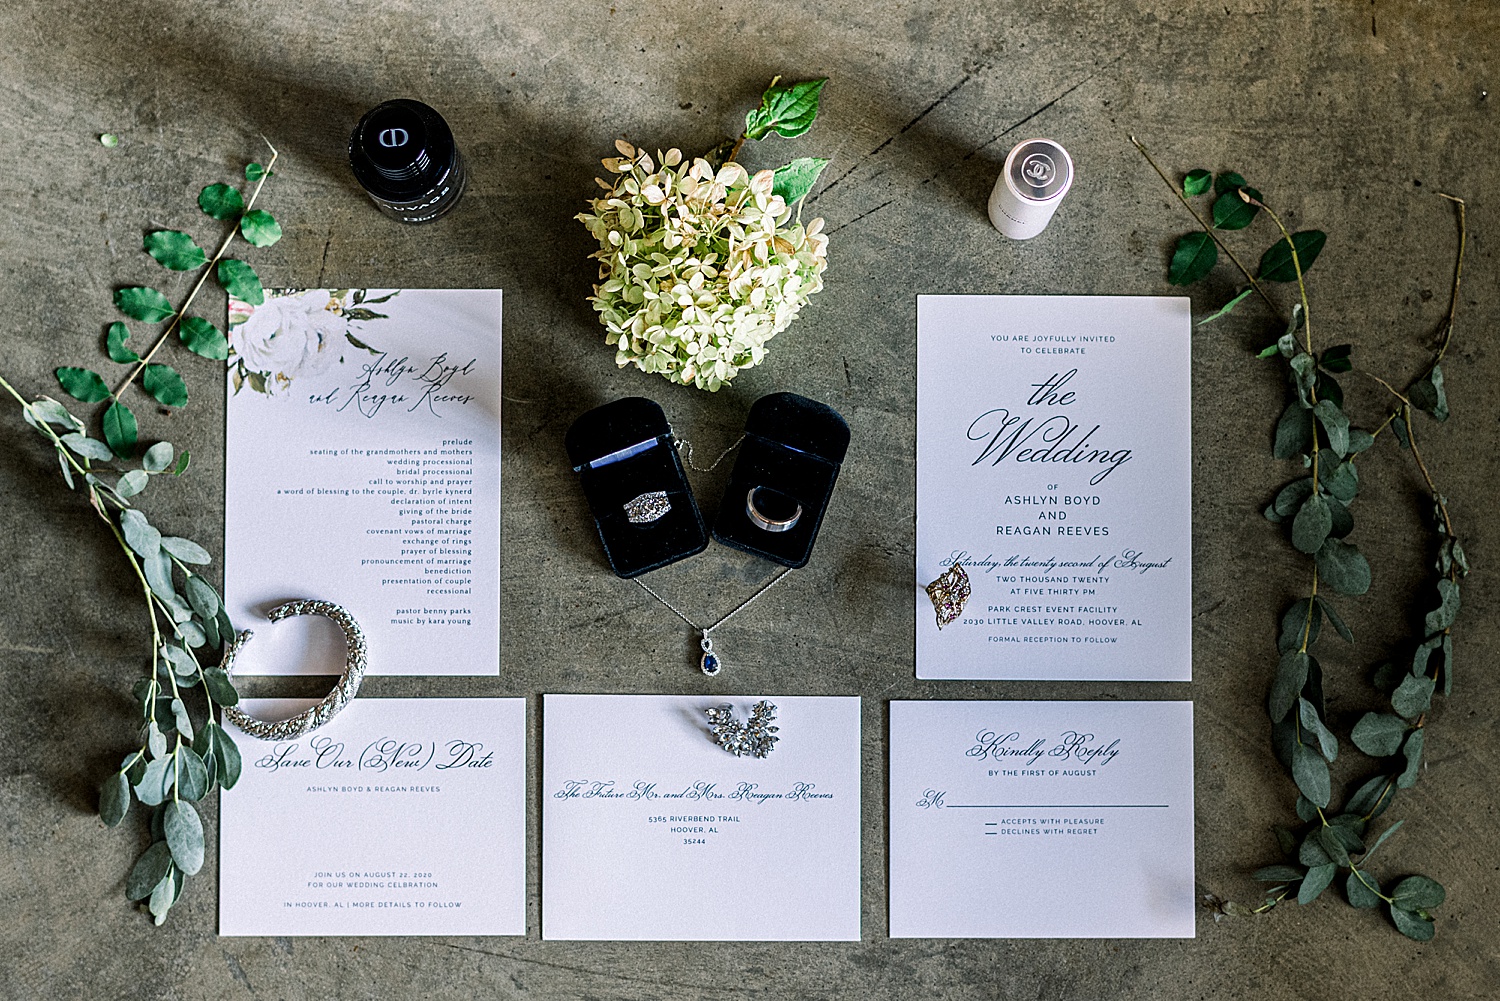 Wedding invitations from Park Crest Events Wedding